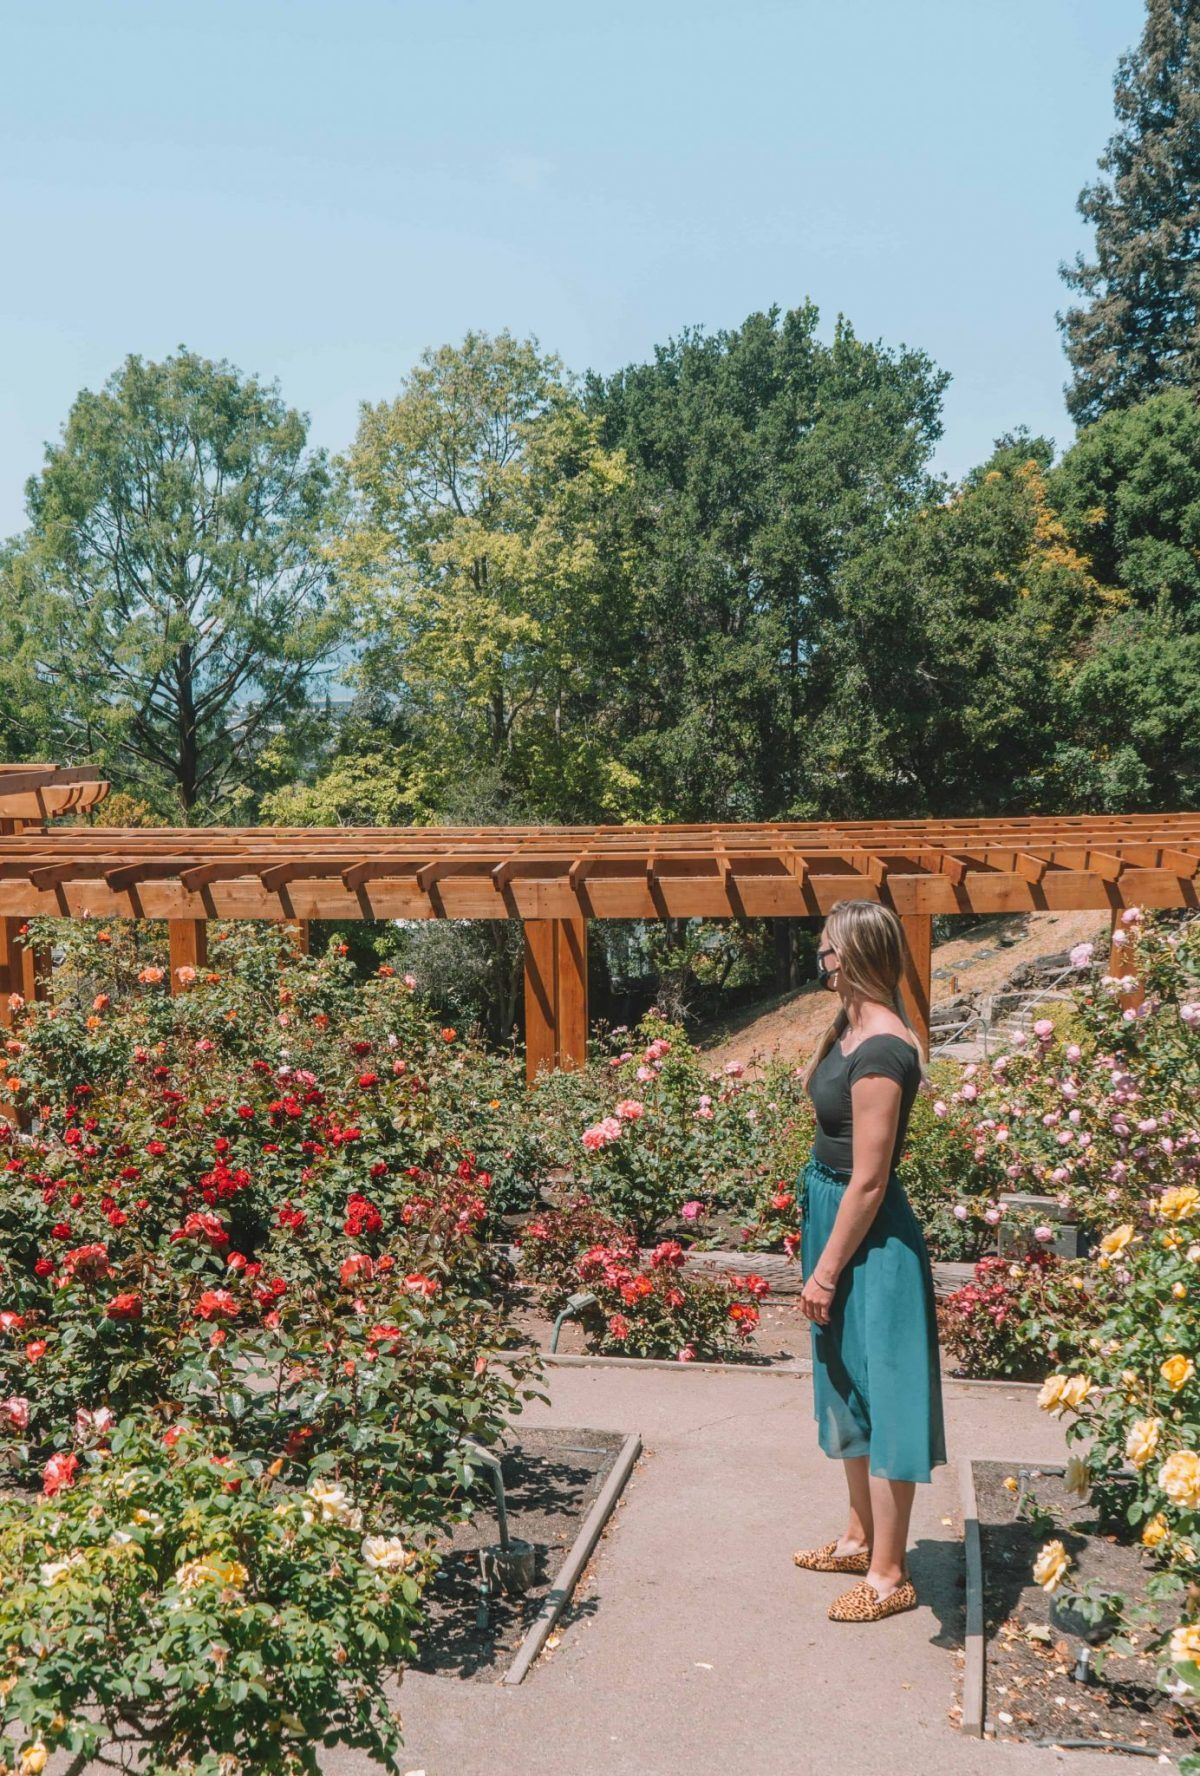 A woman looking towards a rose garden while wearing Birdies The Starling cheetah print shoes.